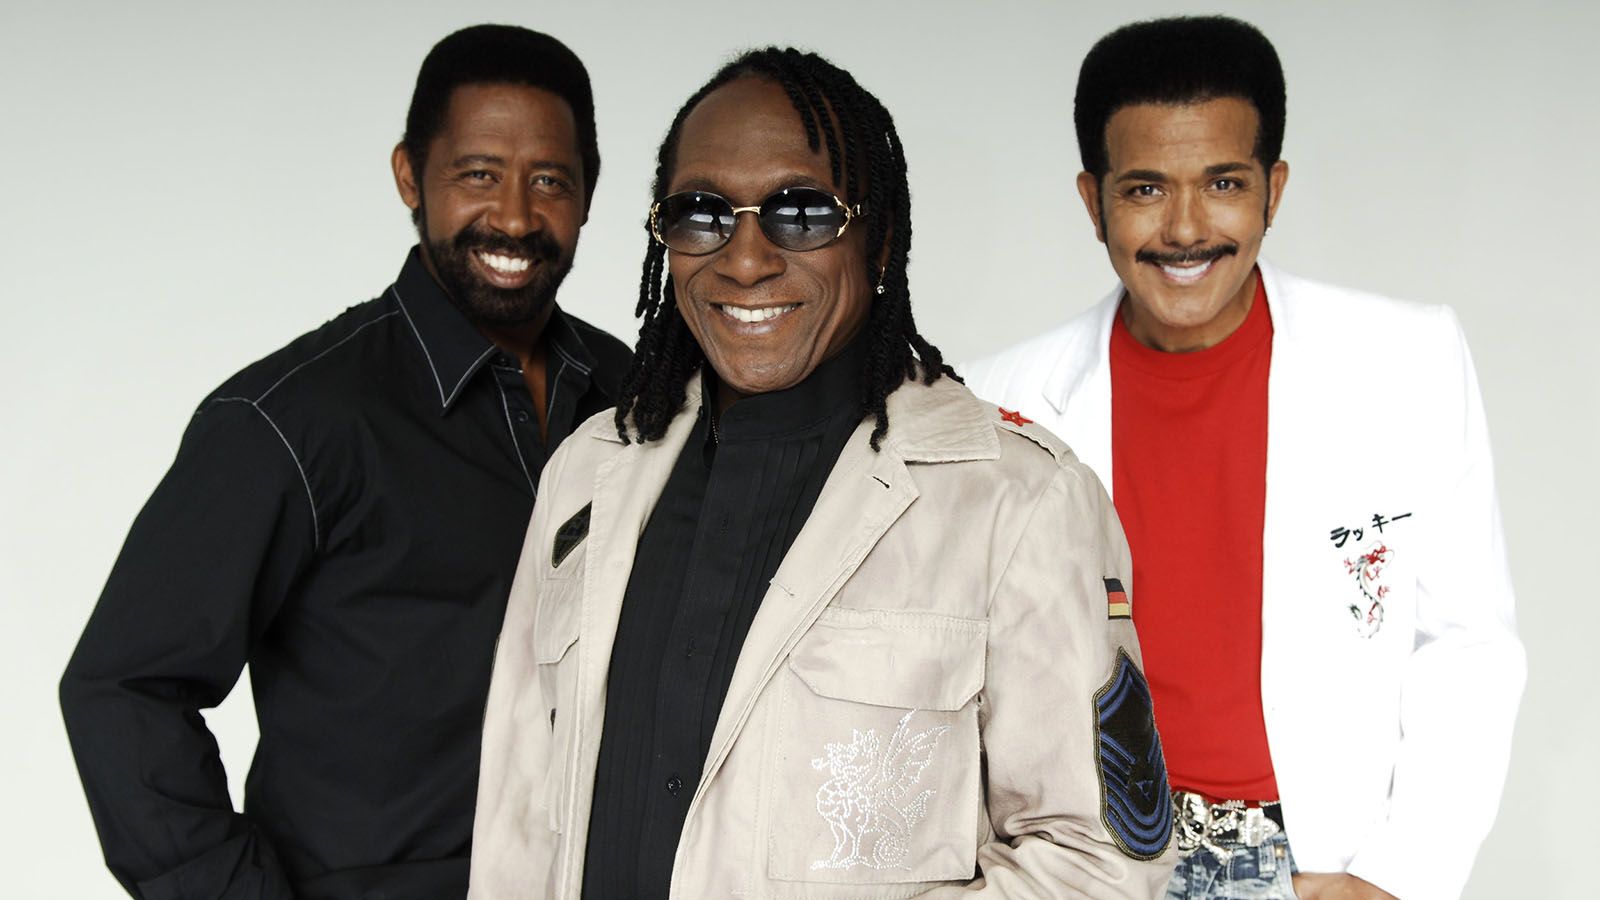 The Commodores will be at The Clyde on Jan. 14.